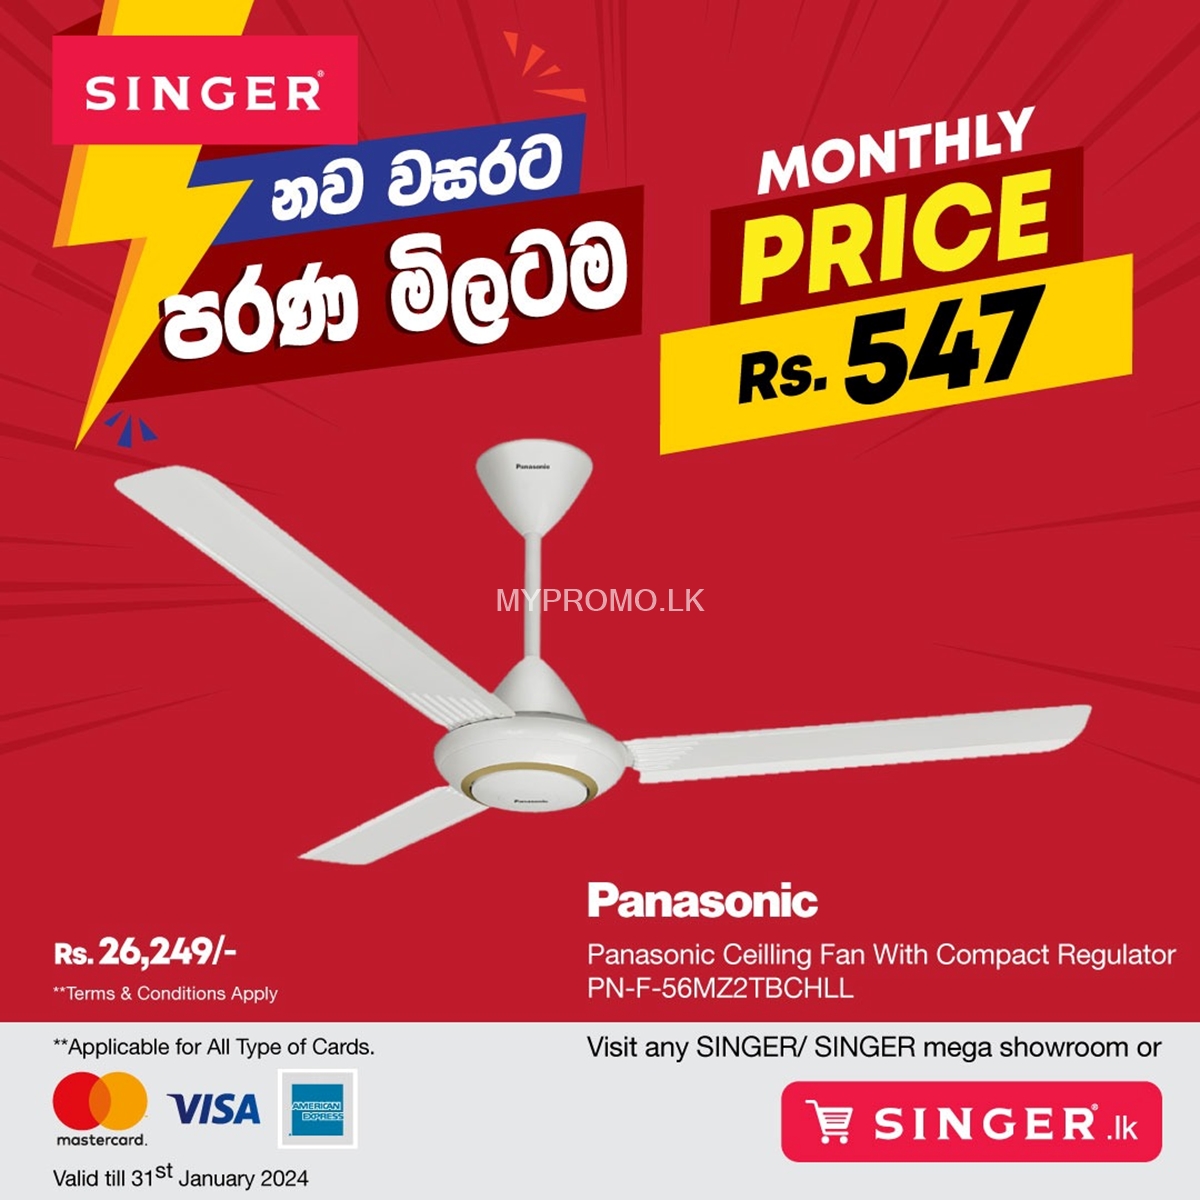 New year's new home electric appliances at the lowest prices from SINGER